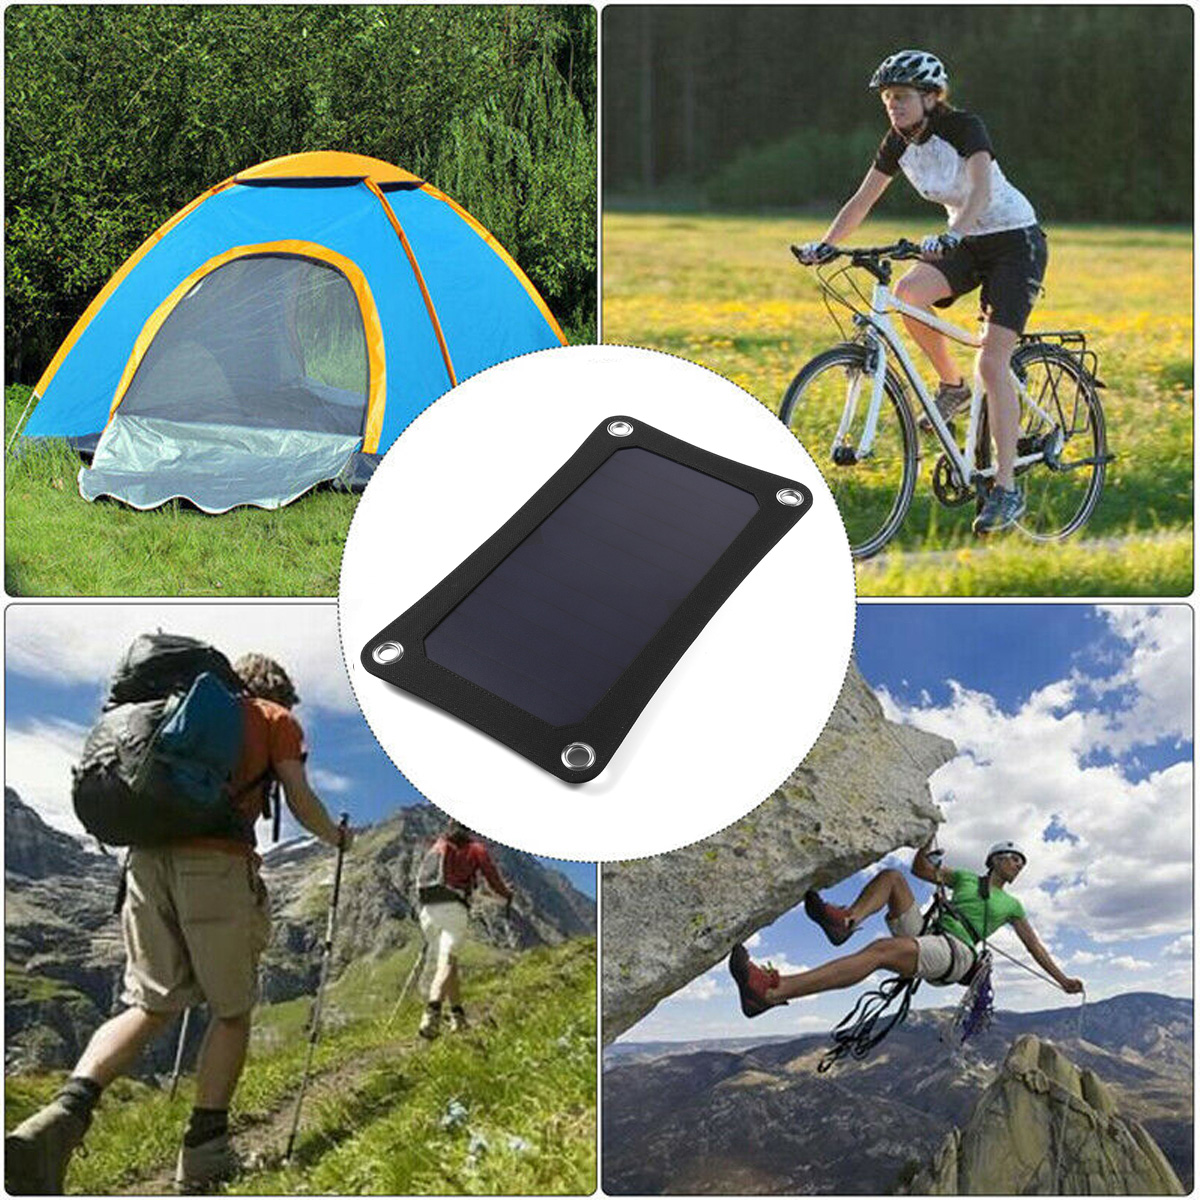 SUNPOWER-32W-5V-High-Efficiency-Solar-Panel-Charger-USB-Backpack-Solar-Power-Bank-for-Outdoor-Campin-1726253-3